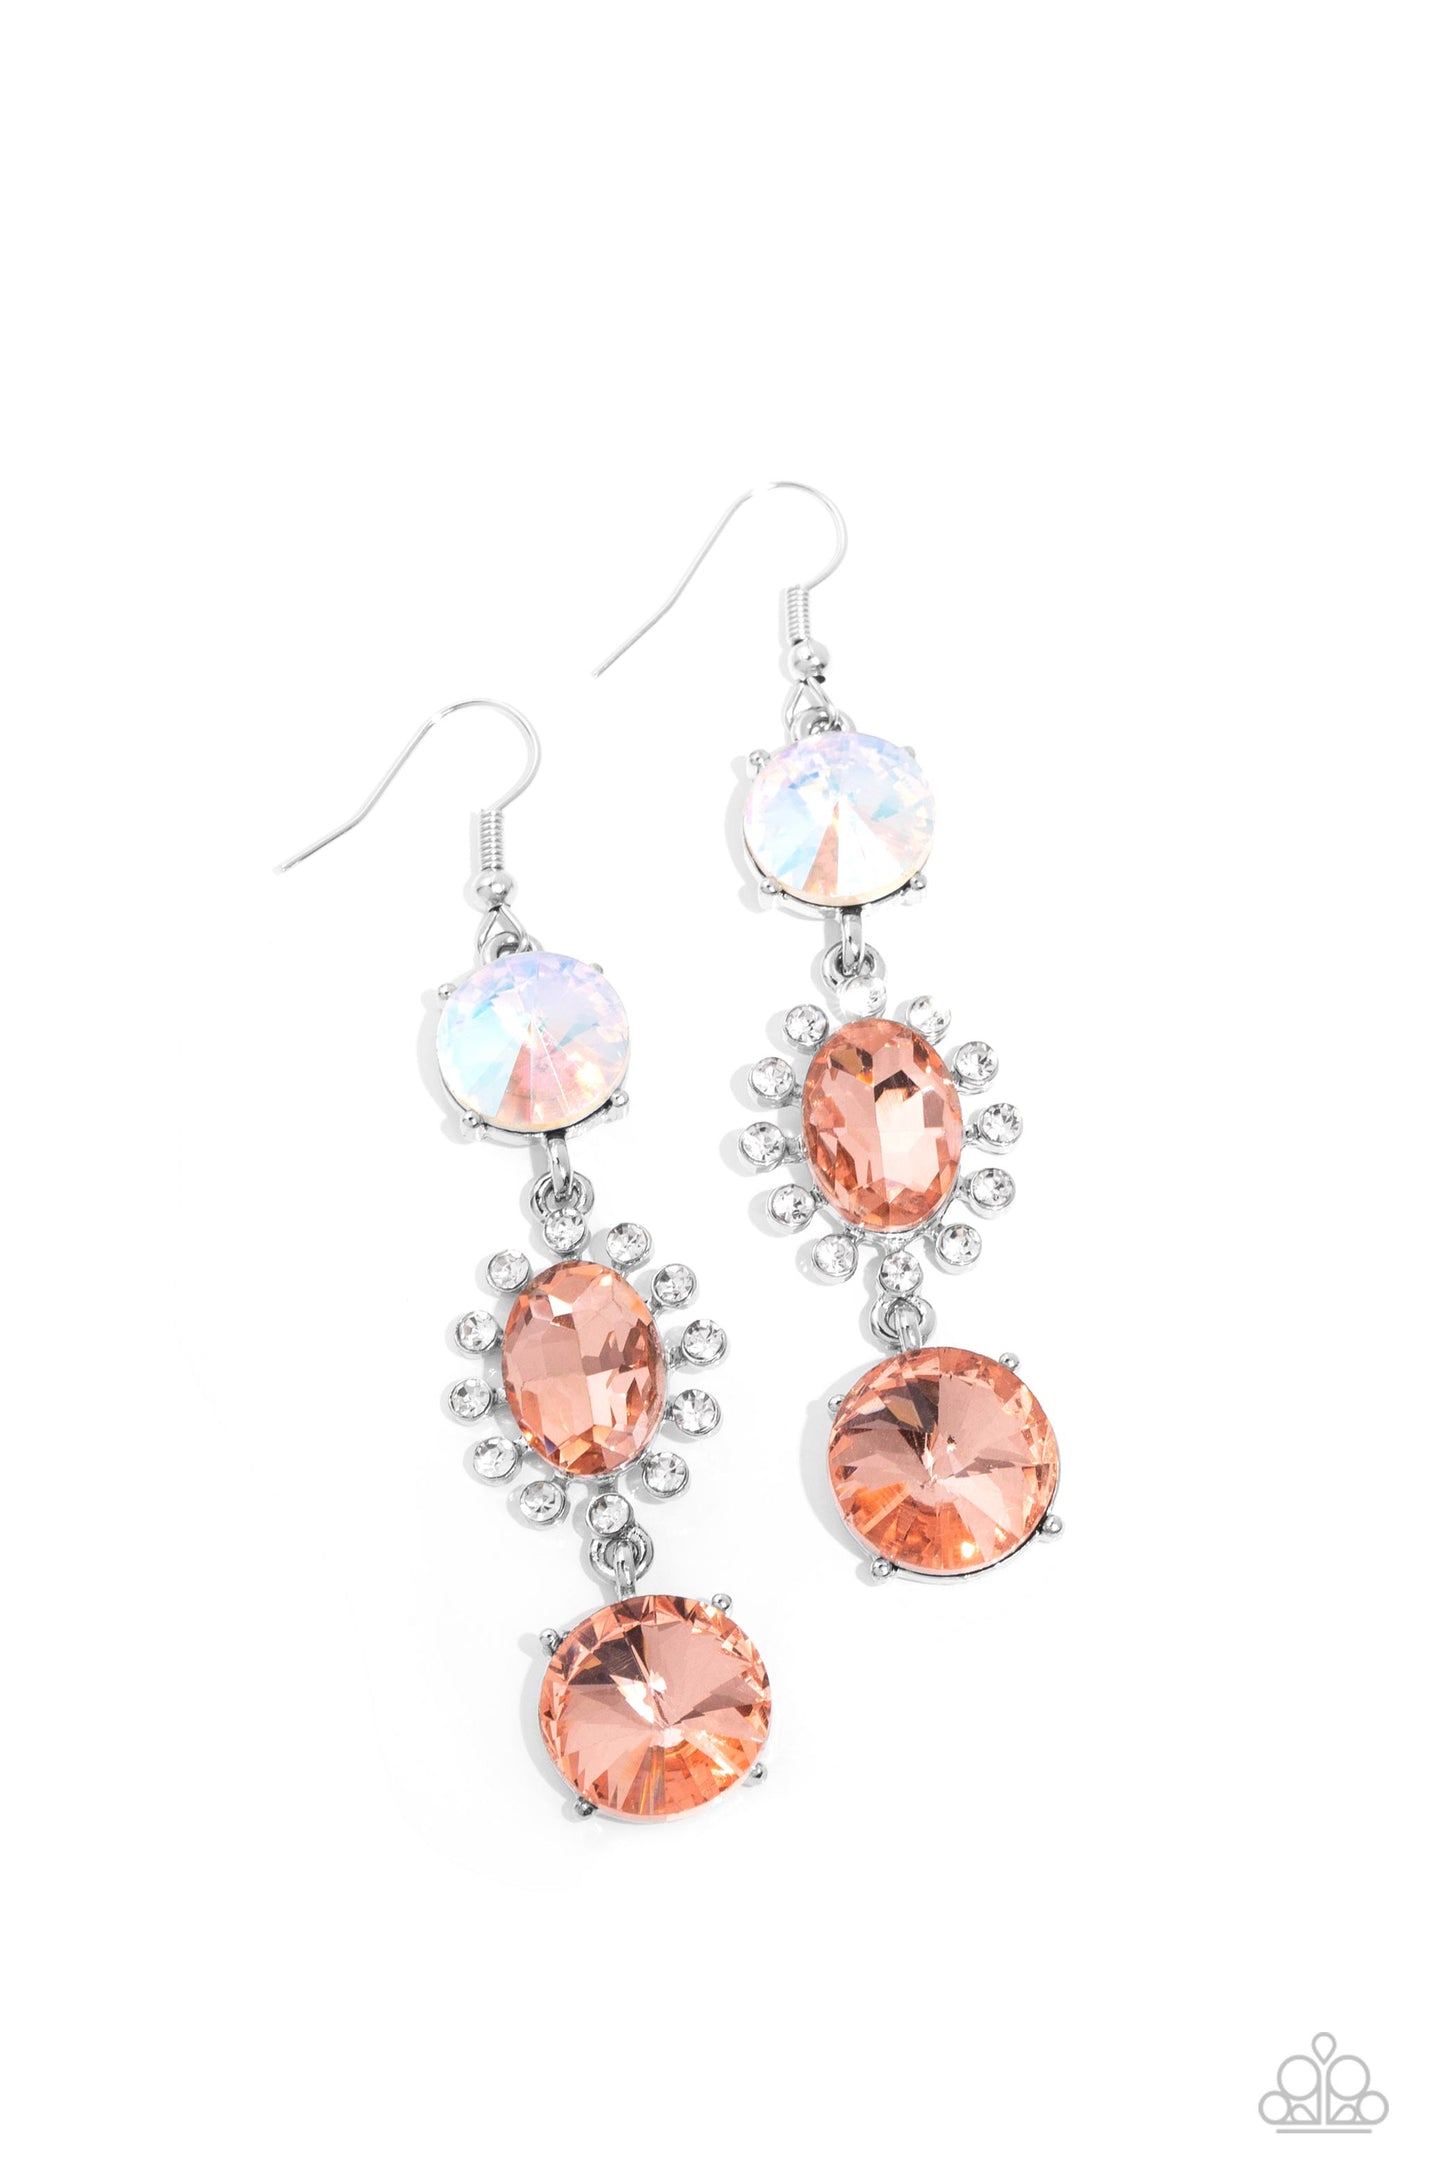 A trio of colorfully iridescent and brilliantly sparkling peach gems are linked together as they fall glamorously from the ear. A round-cut gem with an exaggerated faceted surface anchors the cascade, followed by an oval-cut peach rhinestone bordered in classic white rhinestones. Another round-cut gem — this one in a peach hue — finishes off the design in a sparkling finish. Earring attaches to a standard fishhook fitting. Due to its prismatic palette, color may vary.  Sold as one pair of earrings.